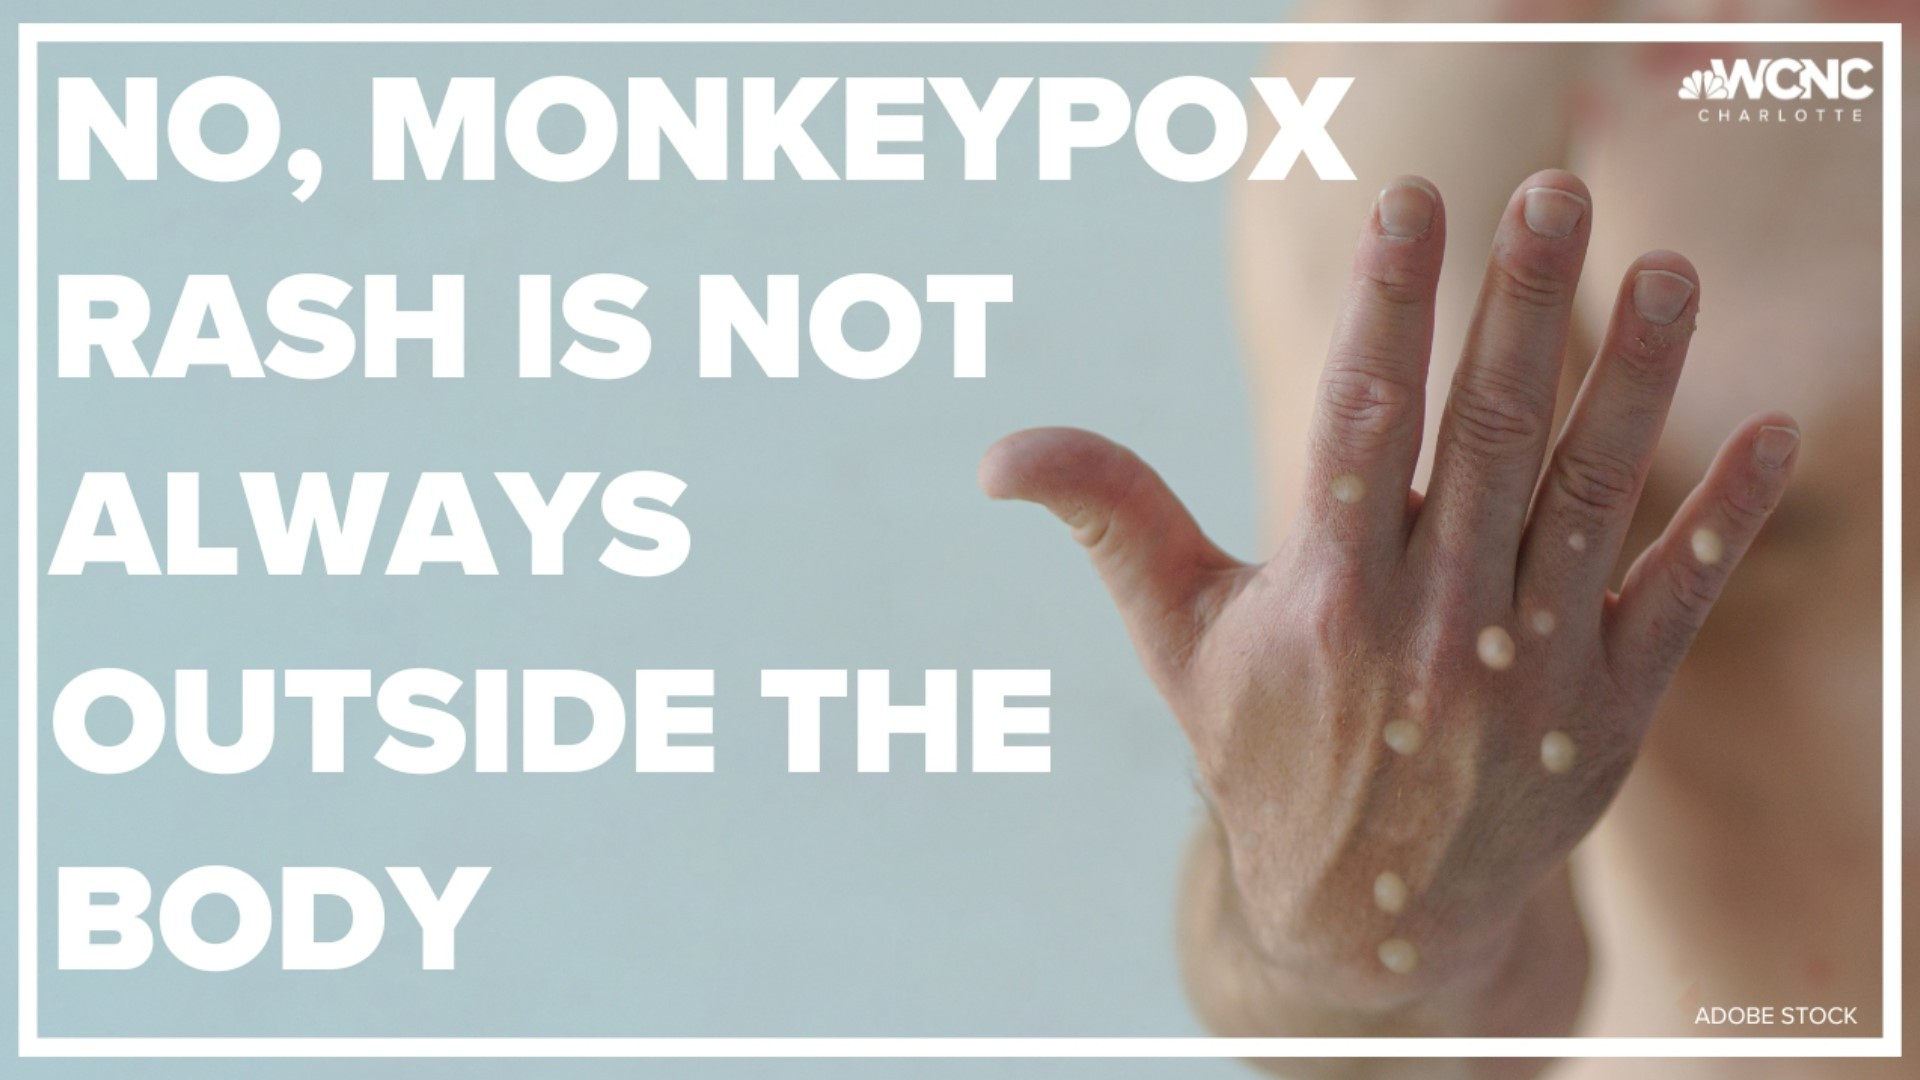 Many circulating photos of rashes from monkeypox infections show bumps and blisters on hands, legs, and faces. Doctors say that's not always where the rash emerges.